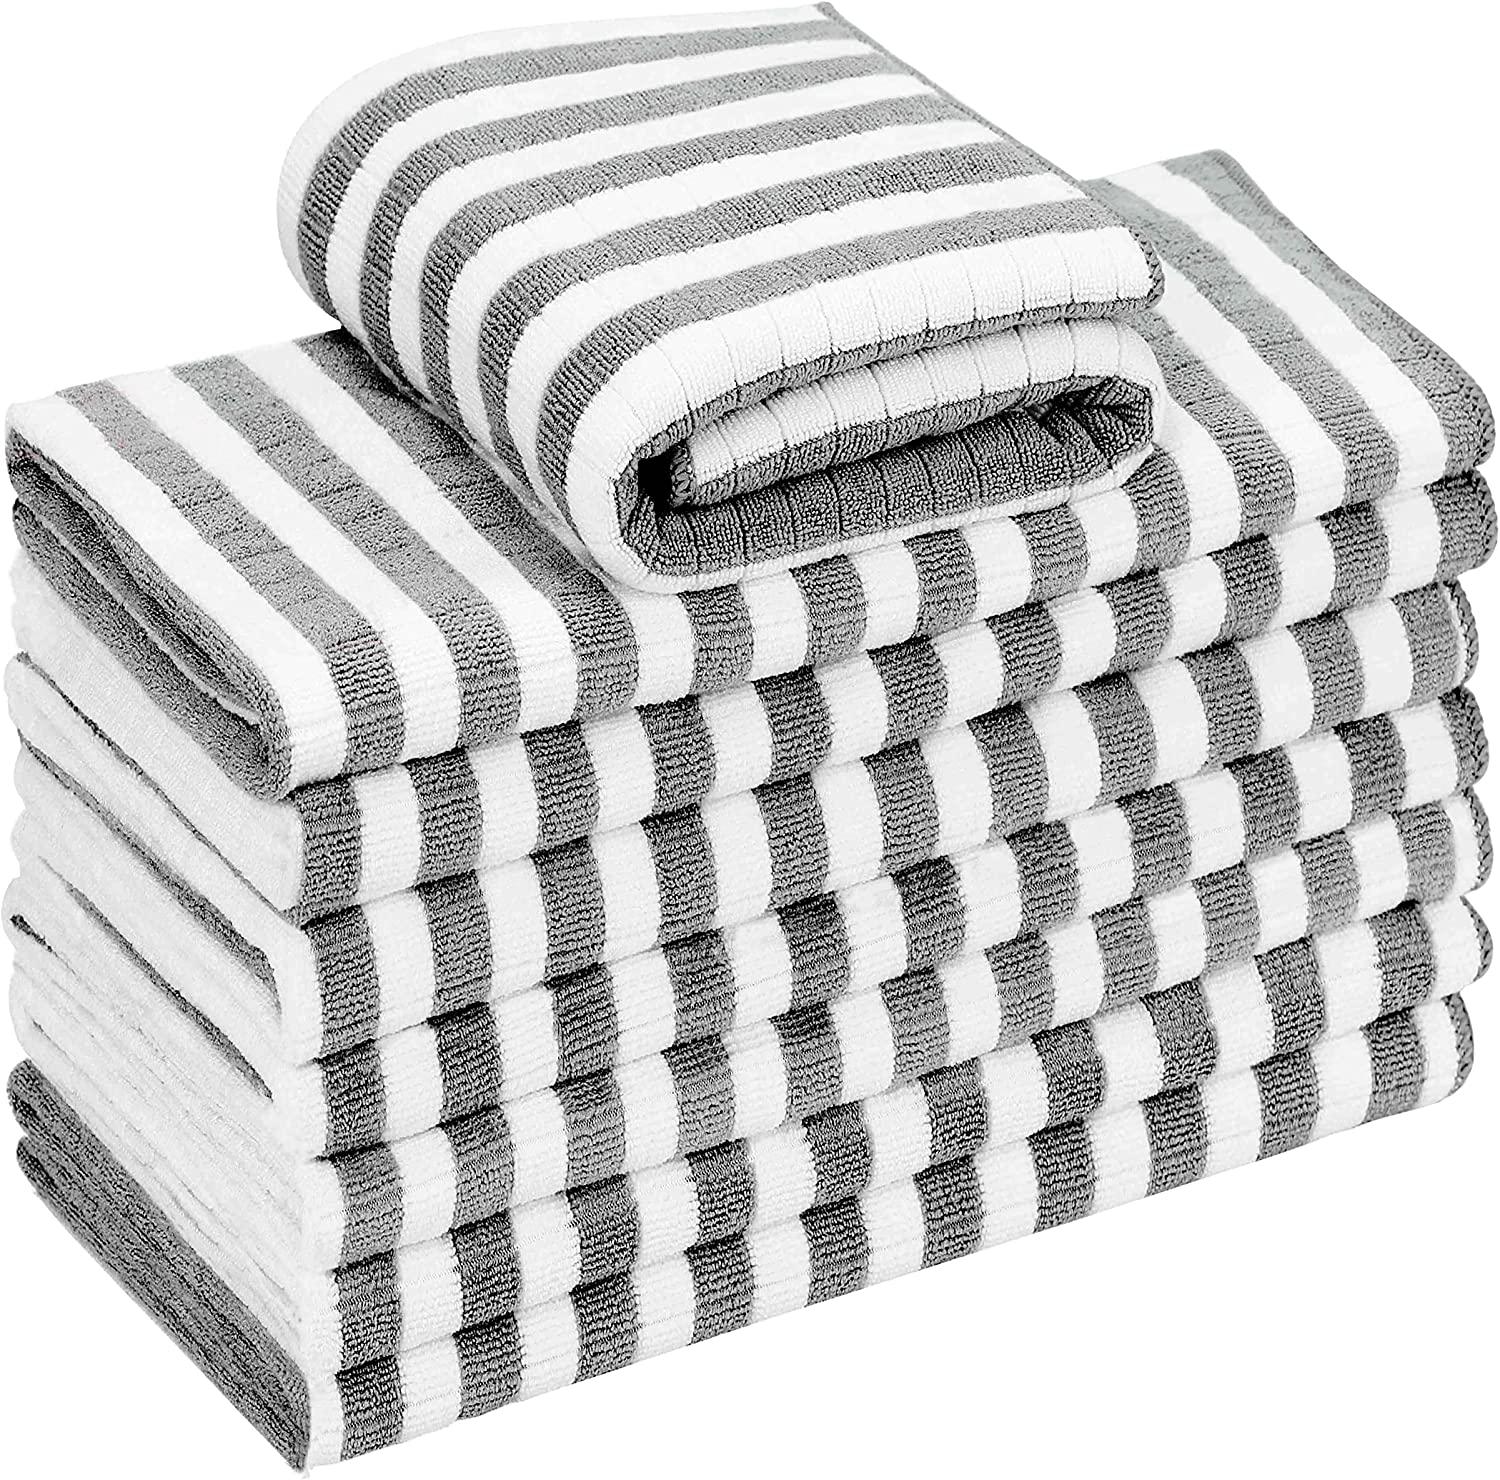 Gryeer Checkered Fast Dry Dish Towels, 8-Pack